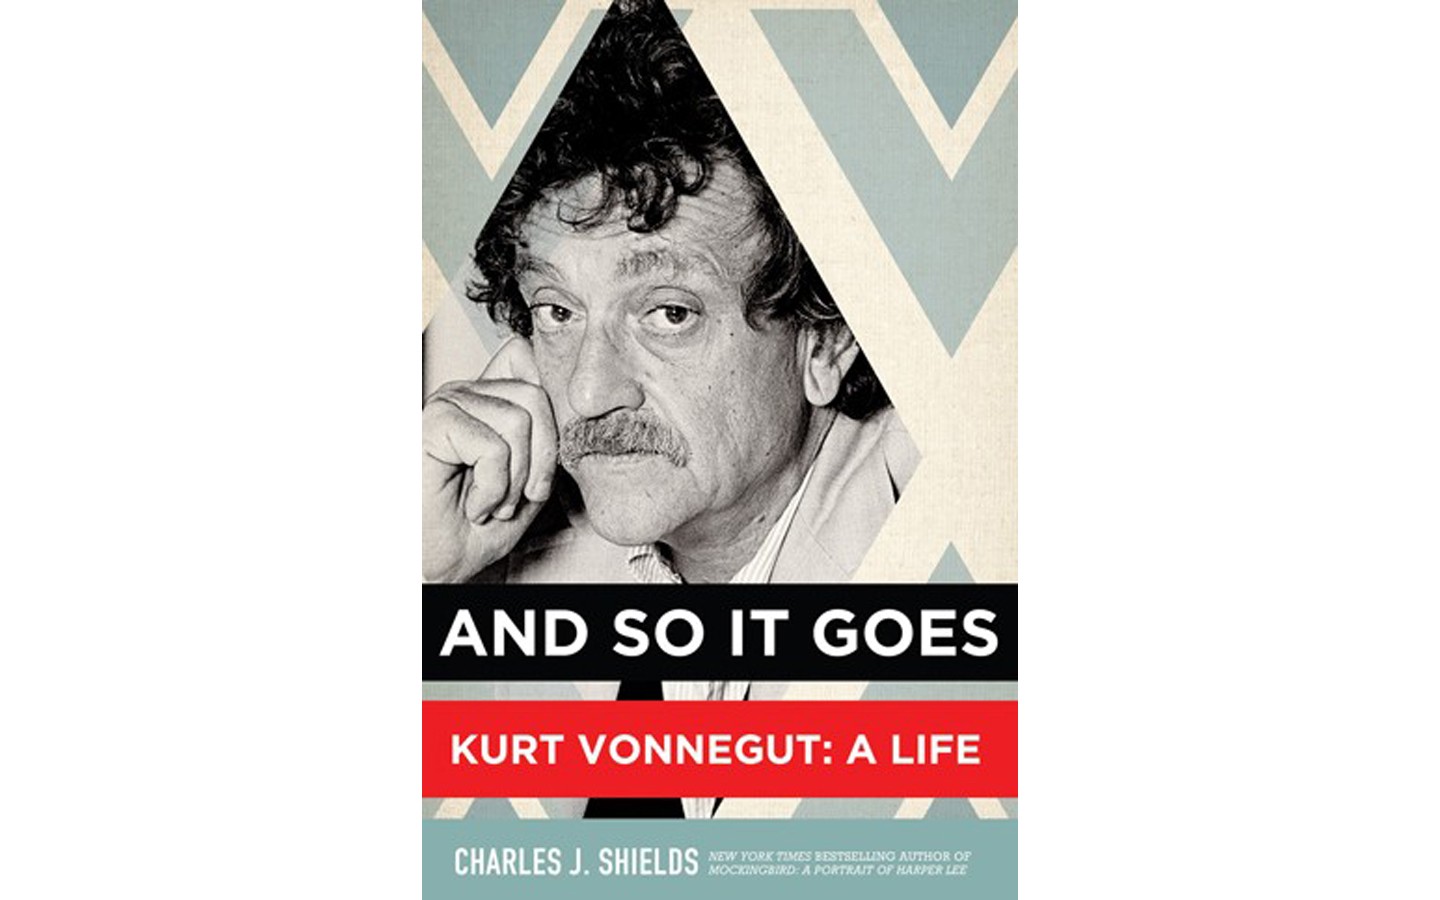 And So It Goes - Kurt Vonnegut: A Life - BY CHARLES J. SHIELDS